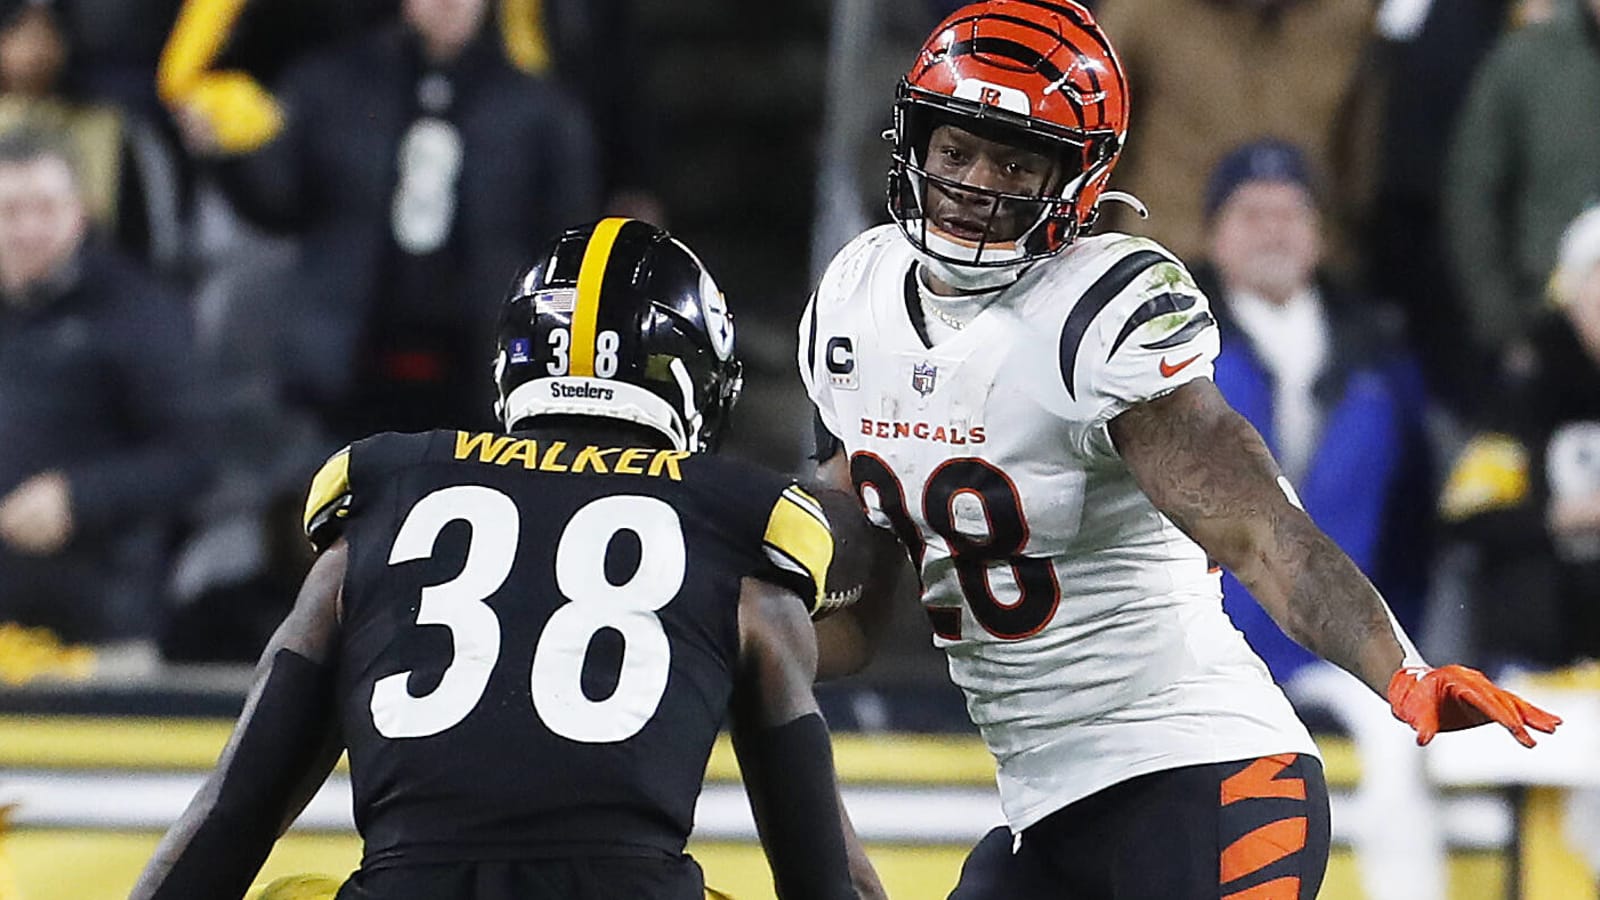 Bengals’ Joe Mixon reveals Jake Browning quality rest of team should emulate after loss to Steelers